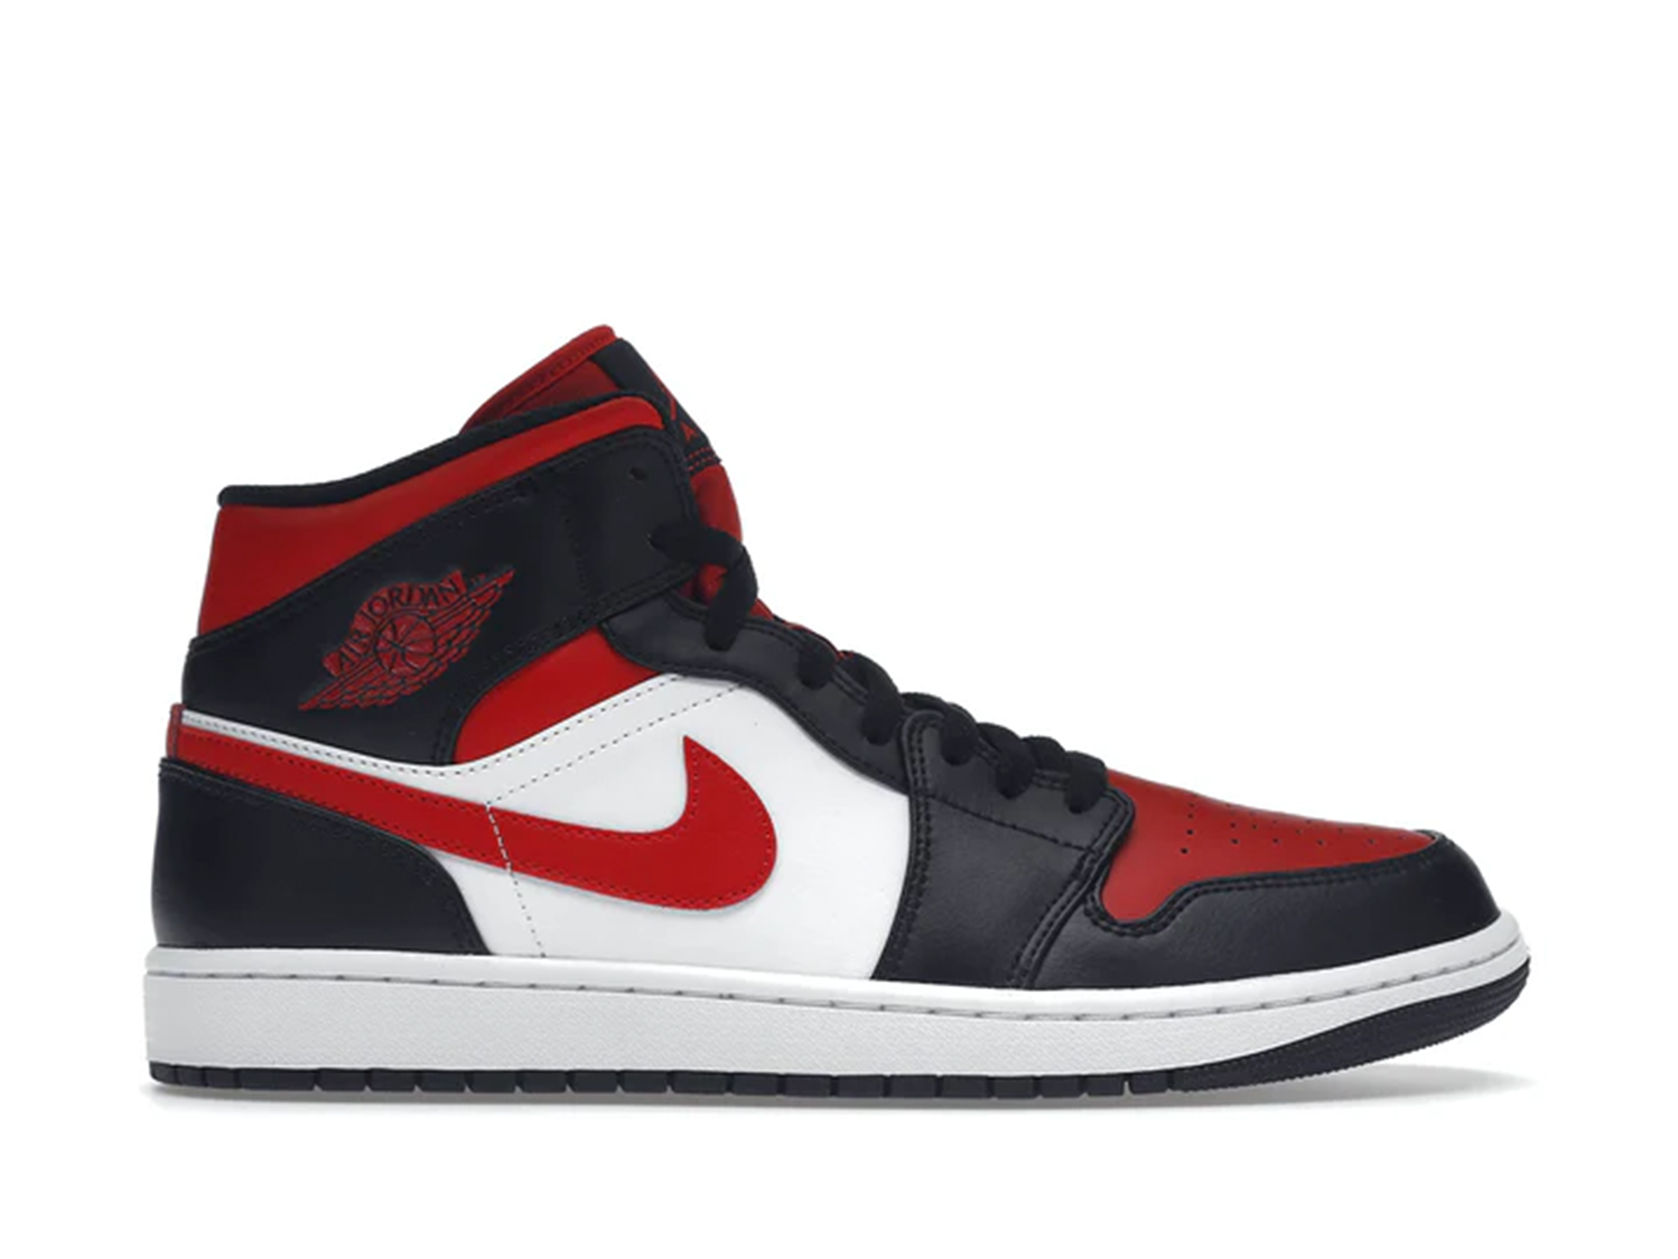 Nike Air Jordan 1 Mid Fire Red Bred Toe White – Double Boxed